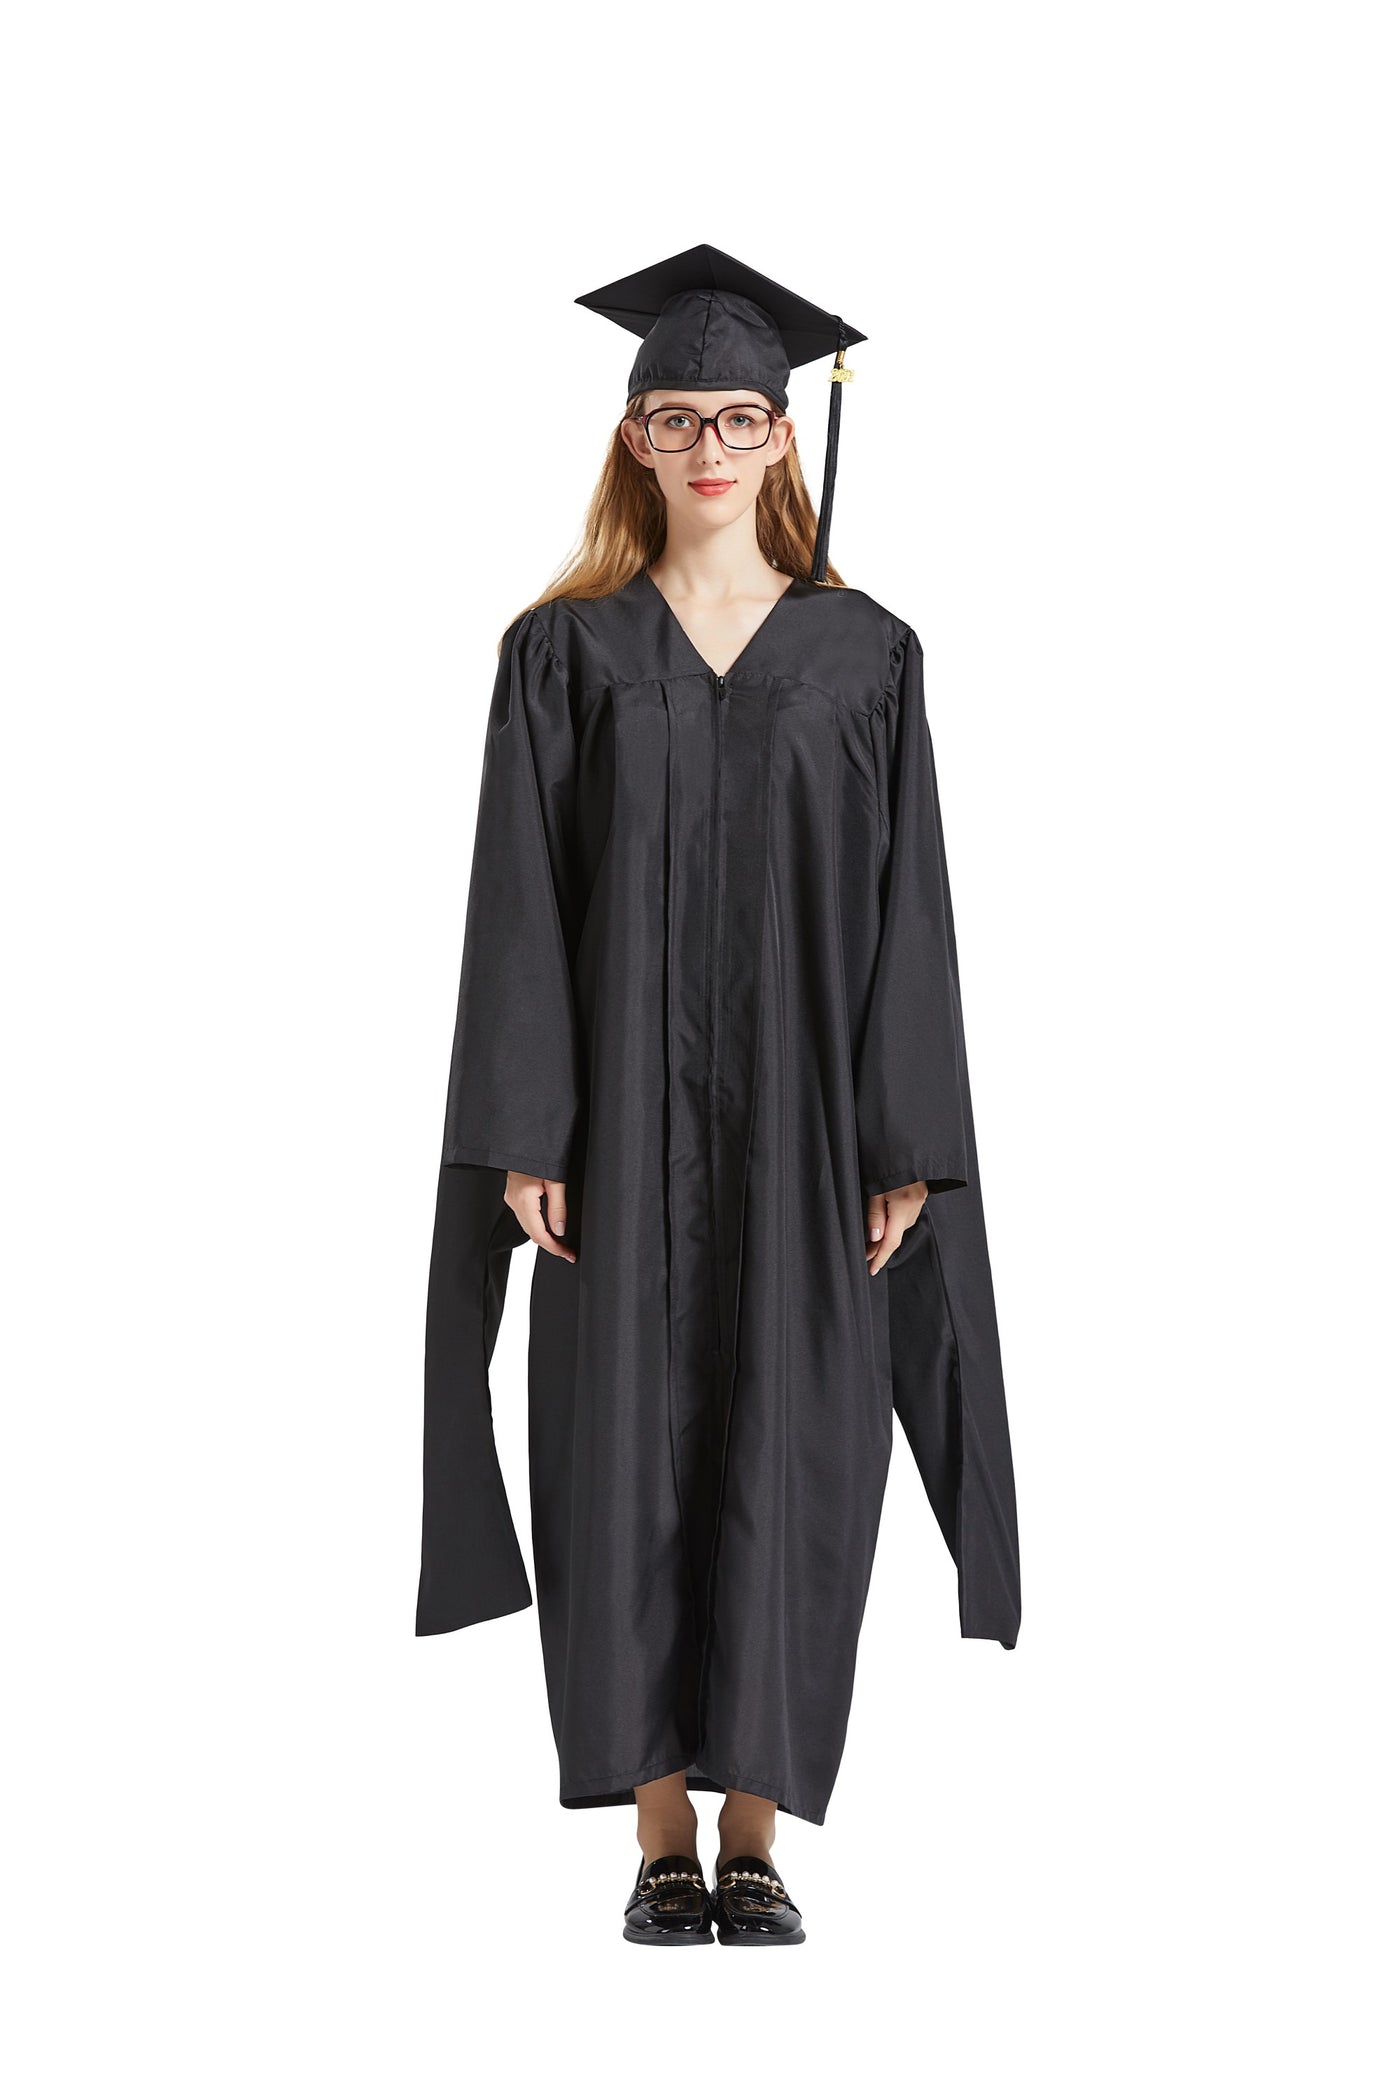 Cap & Gown | For Students | Commencement | DePaul University, Chicago